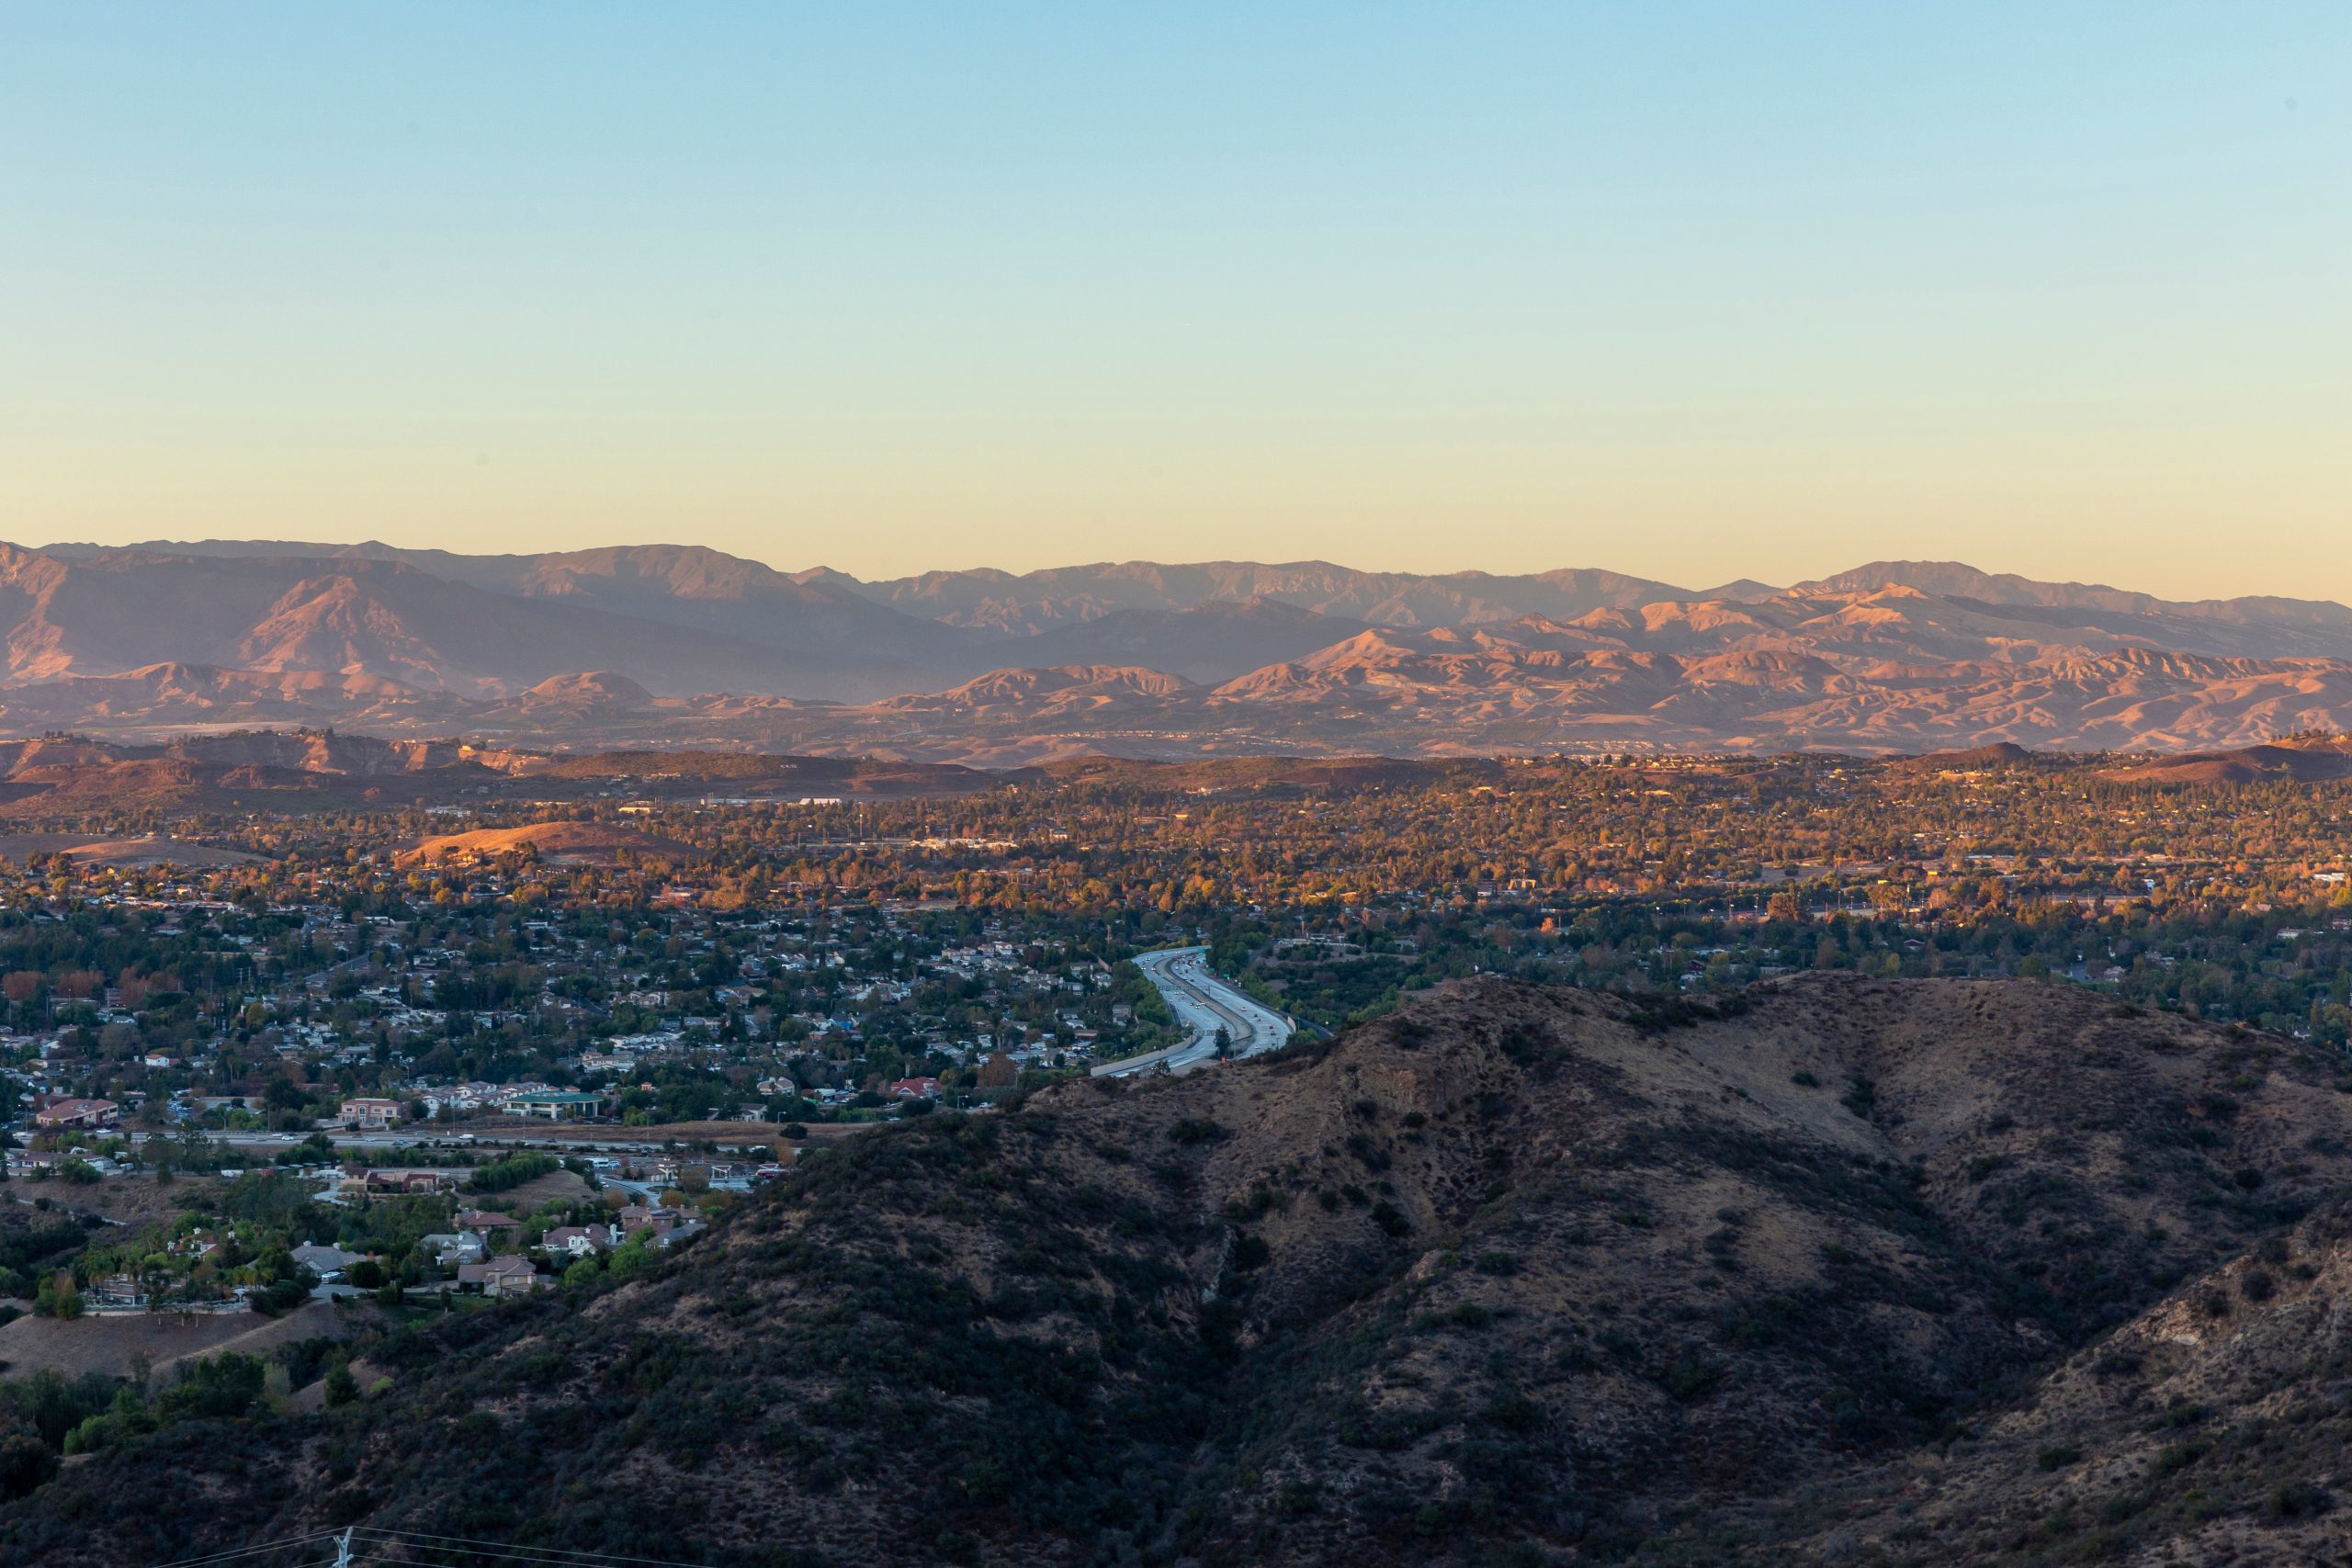 Sunset over the Conejo Valley, California and the 101 freeway.